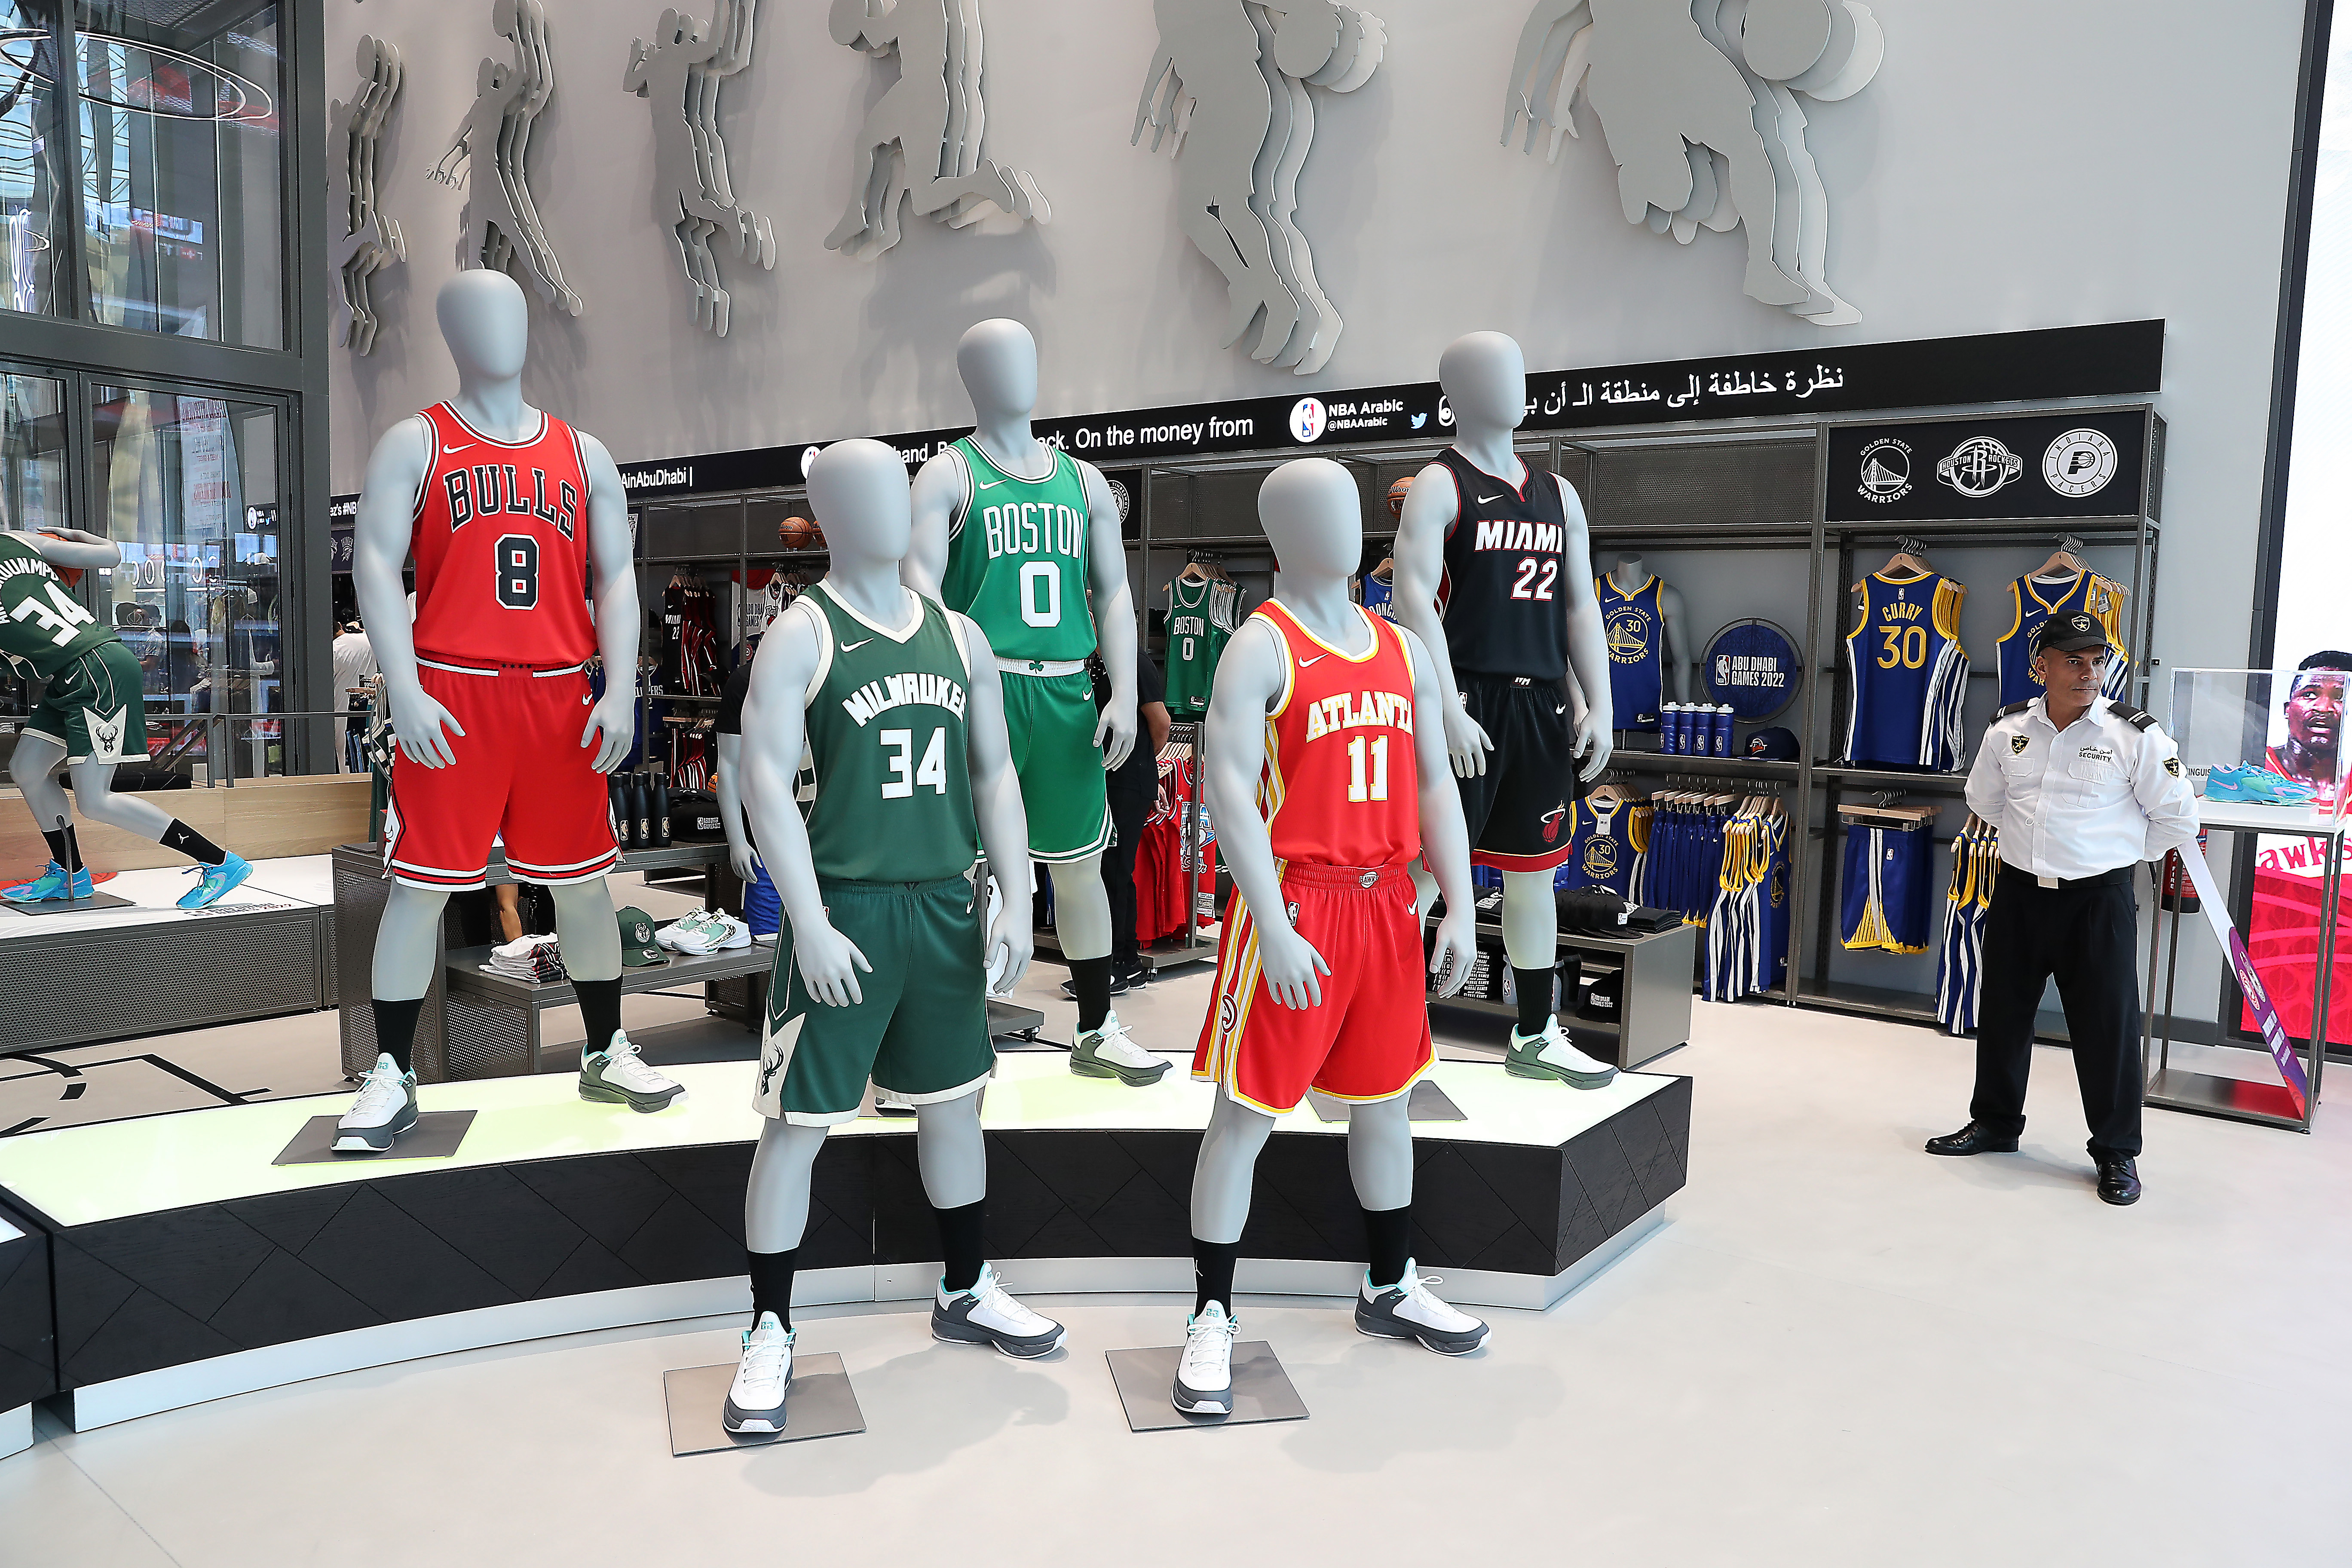 NBA STORE MIDDLE EAST (@nba_store_me) • Instagram photos and videos